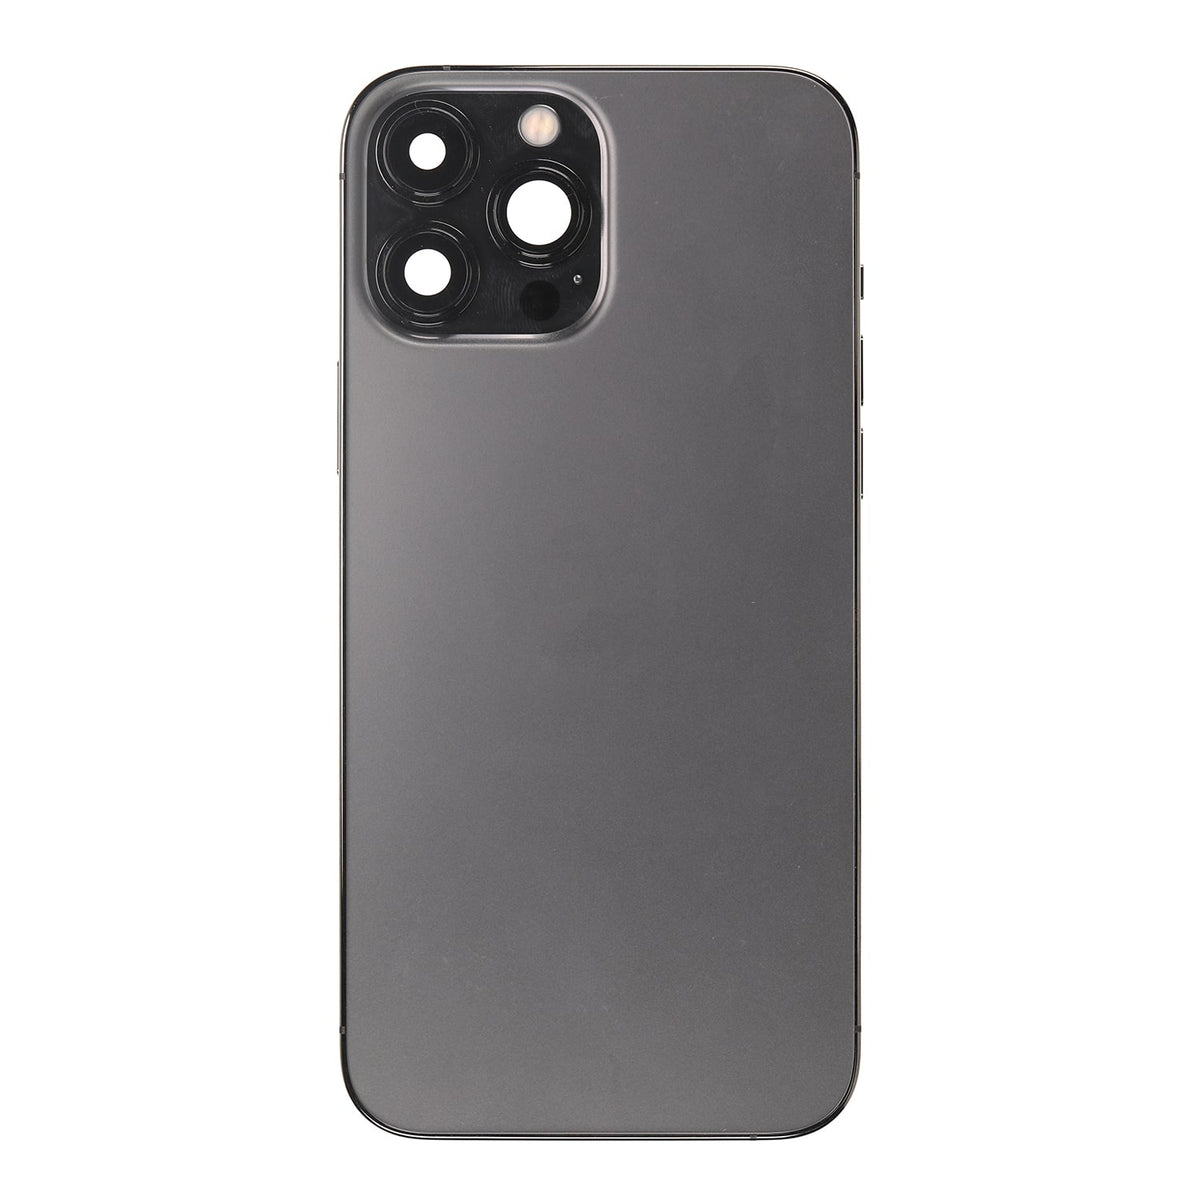 GRAPHITE REAR HOUSING WITH FRAME FOR IPHONE 13 PRO